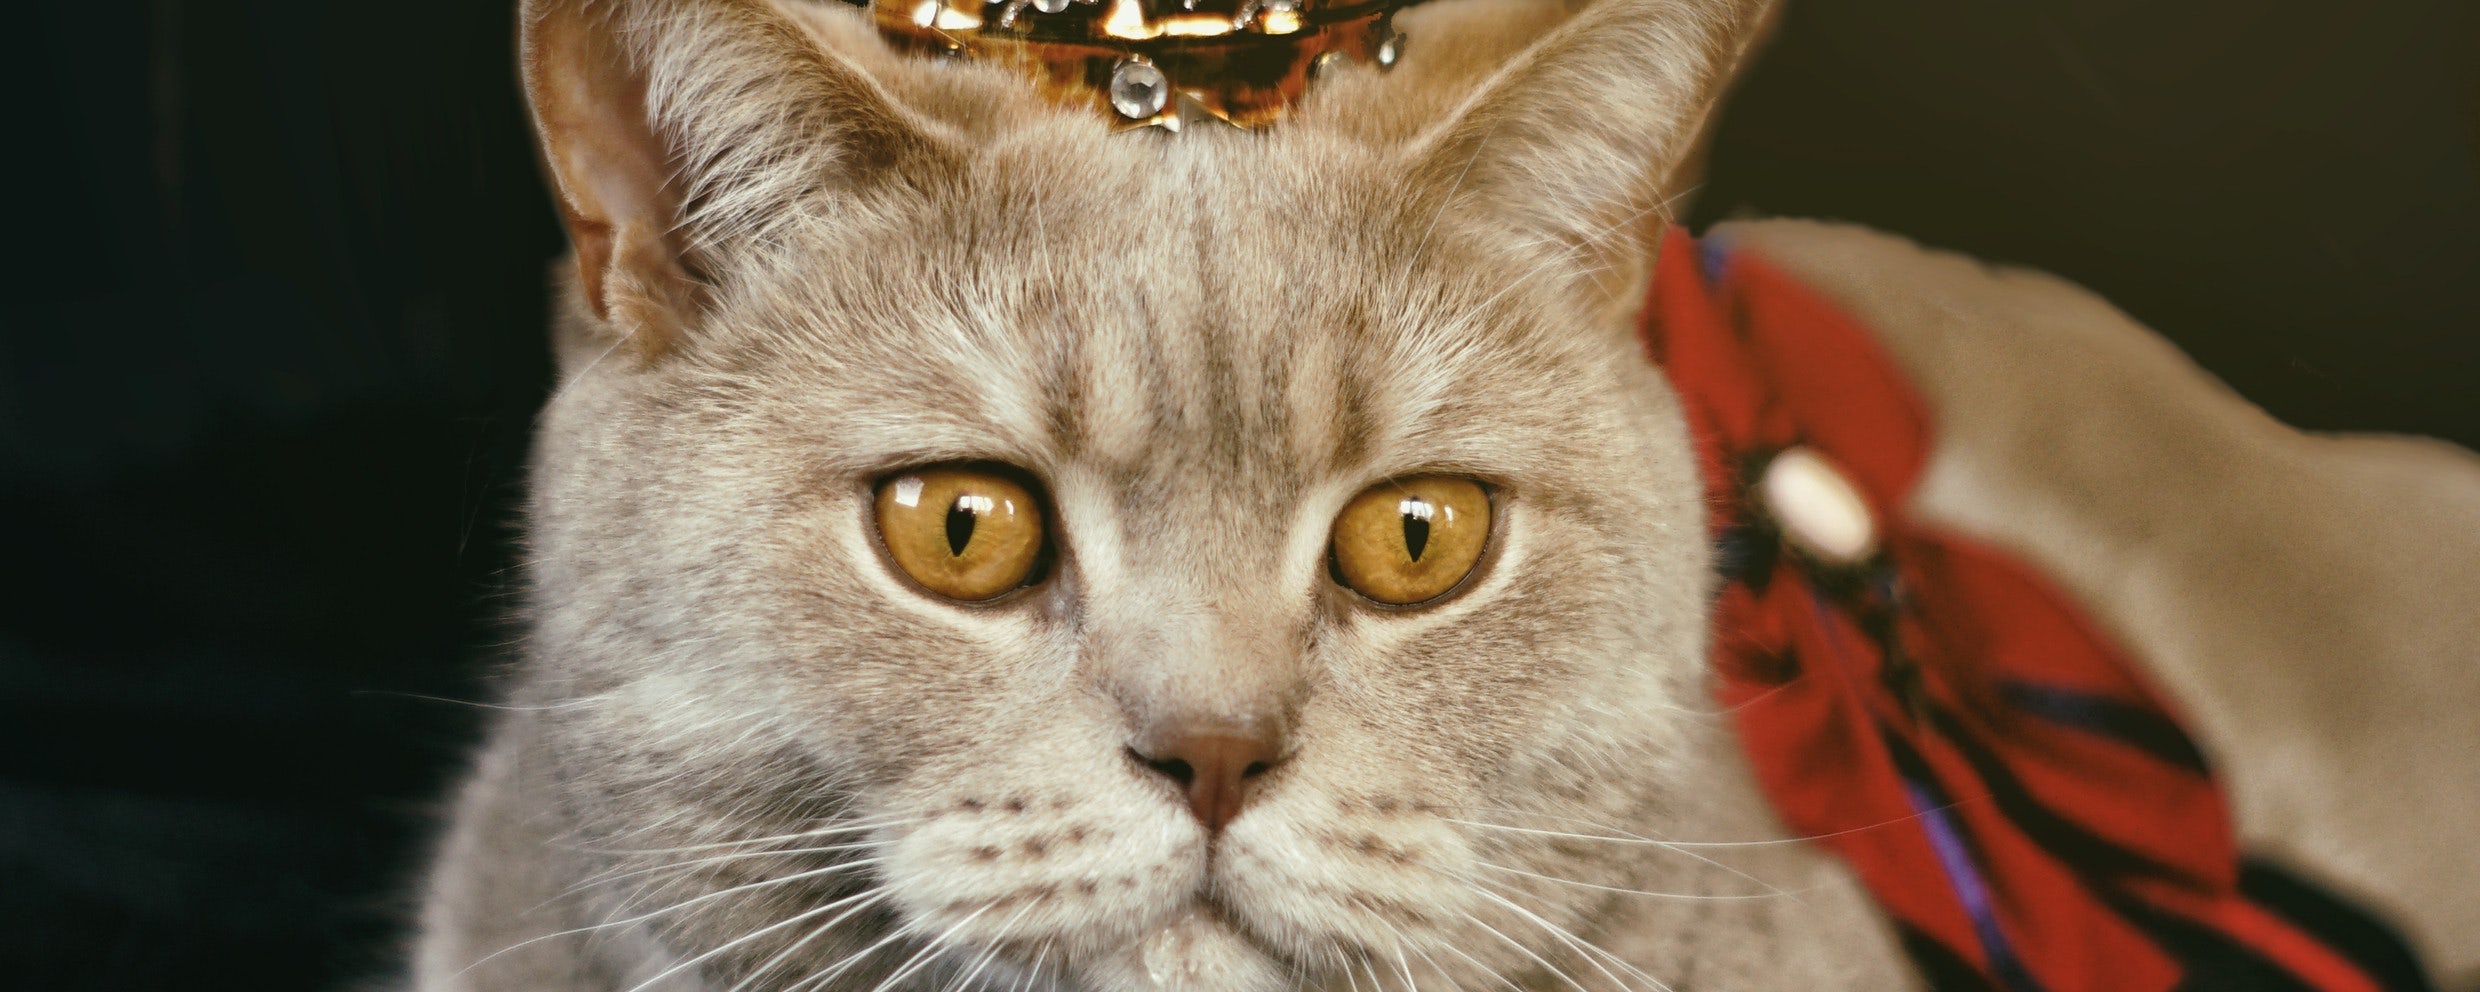 Cat with Crown